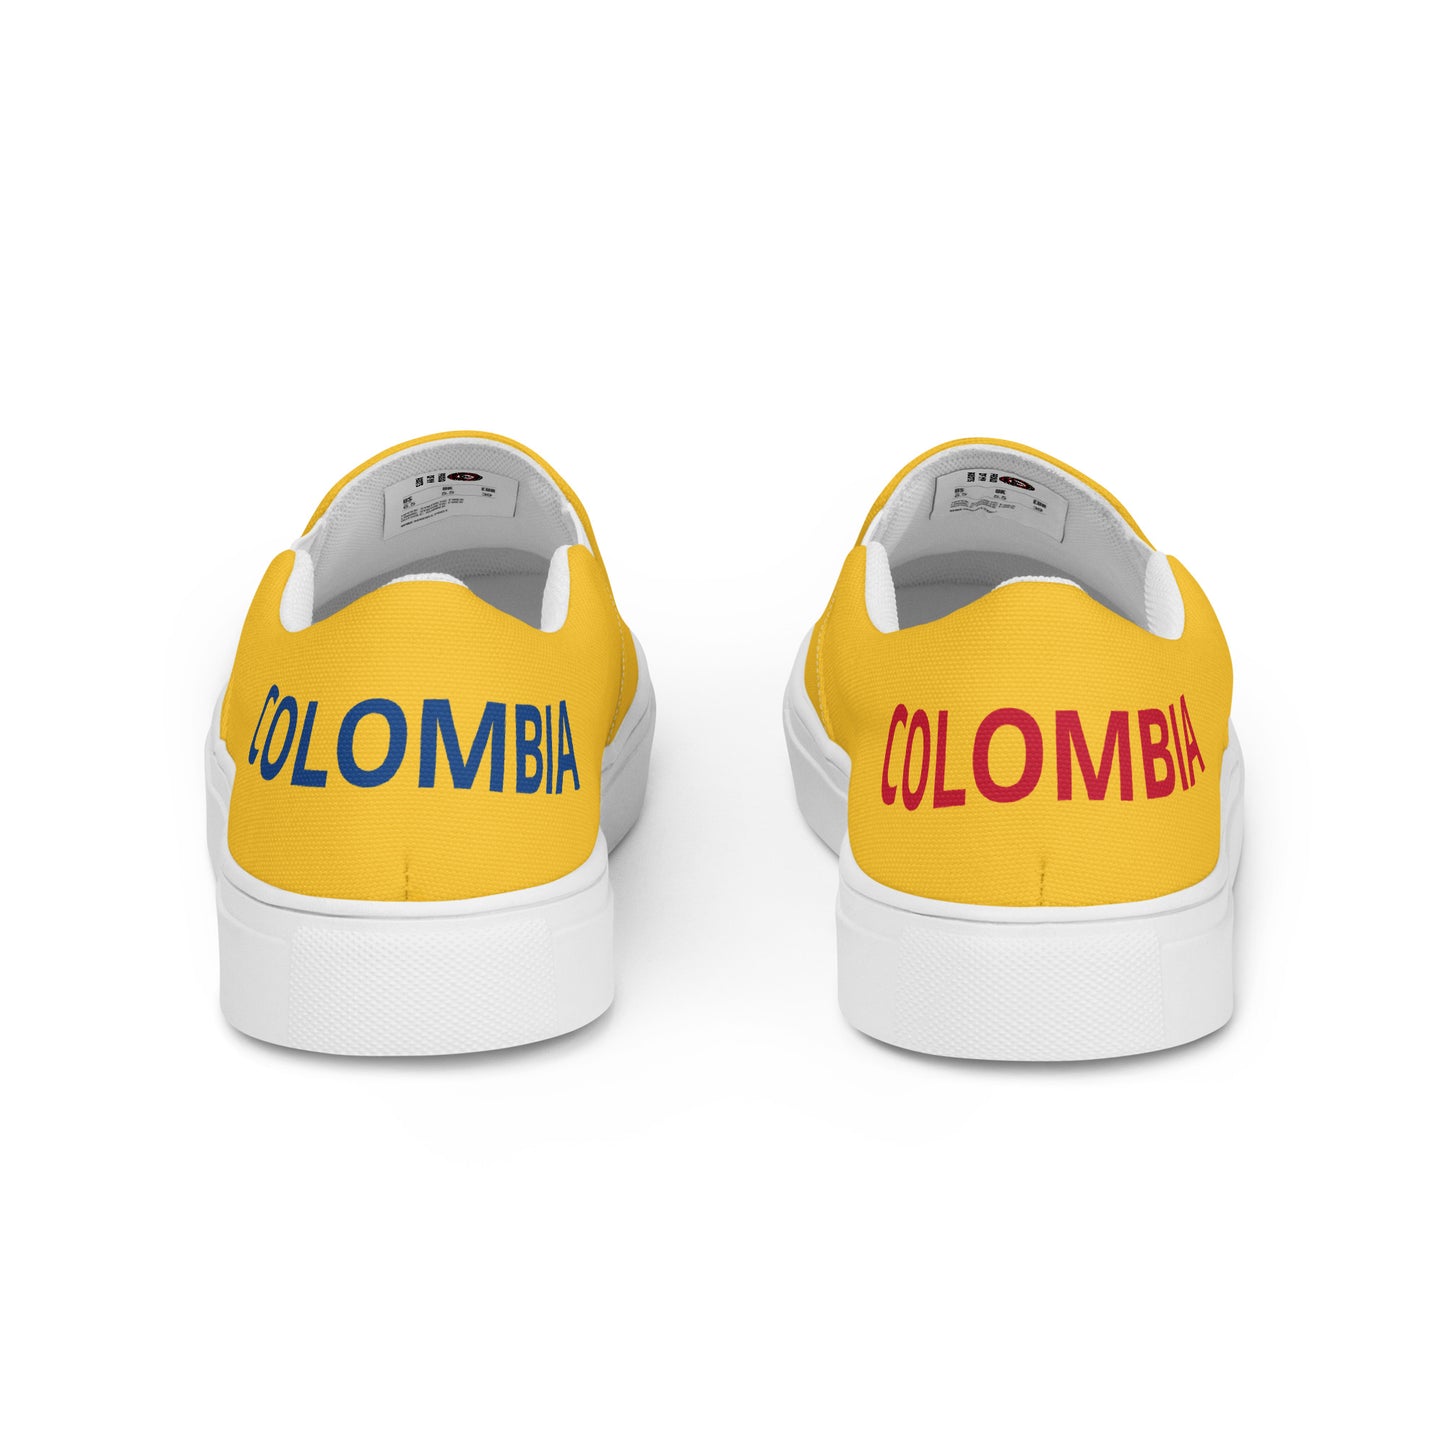 Colombia - Men - Yellow - Slip-on canvas shoes